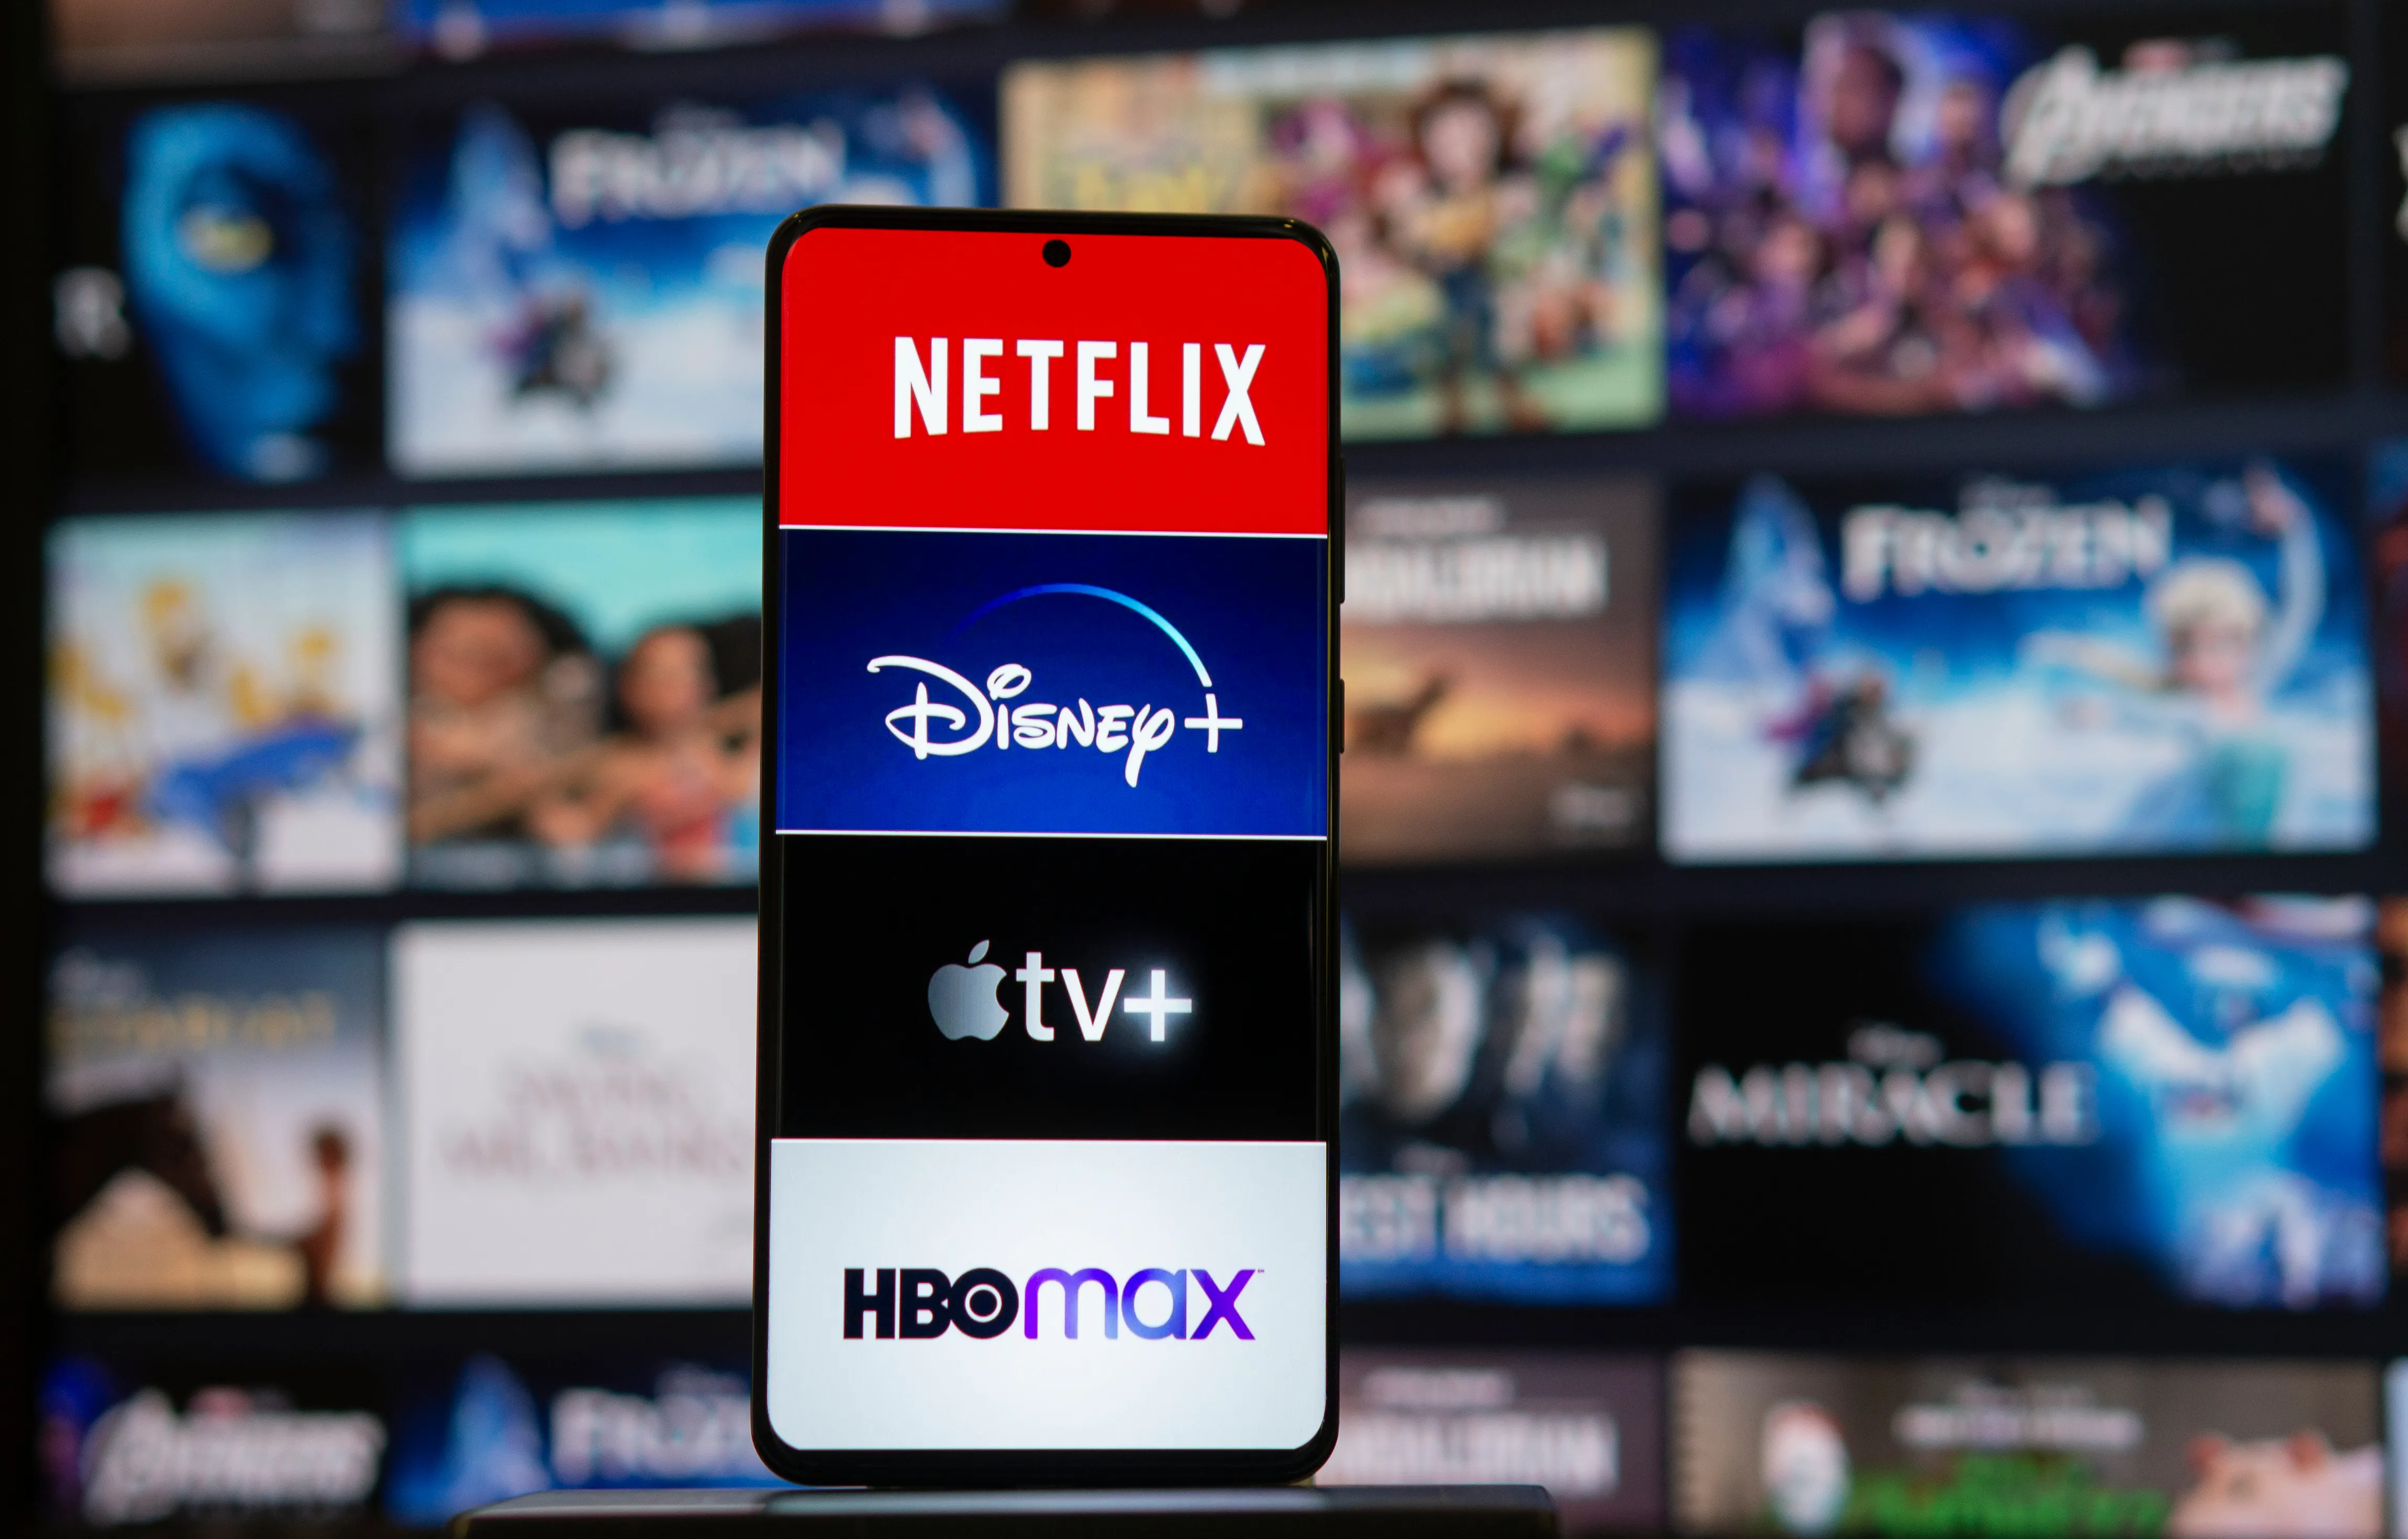 Comparing Top Streaming Services: Which is Best?